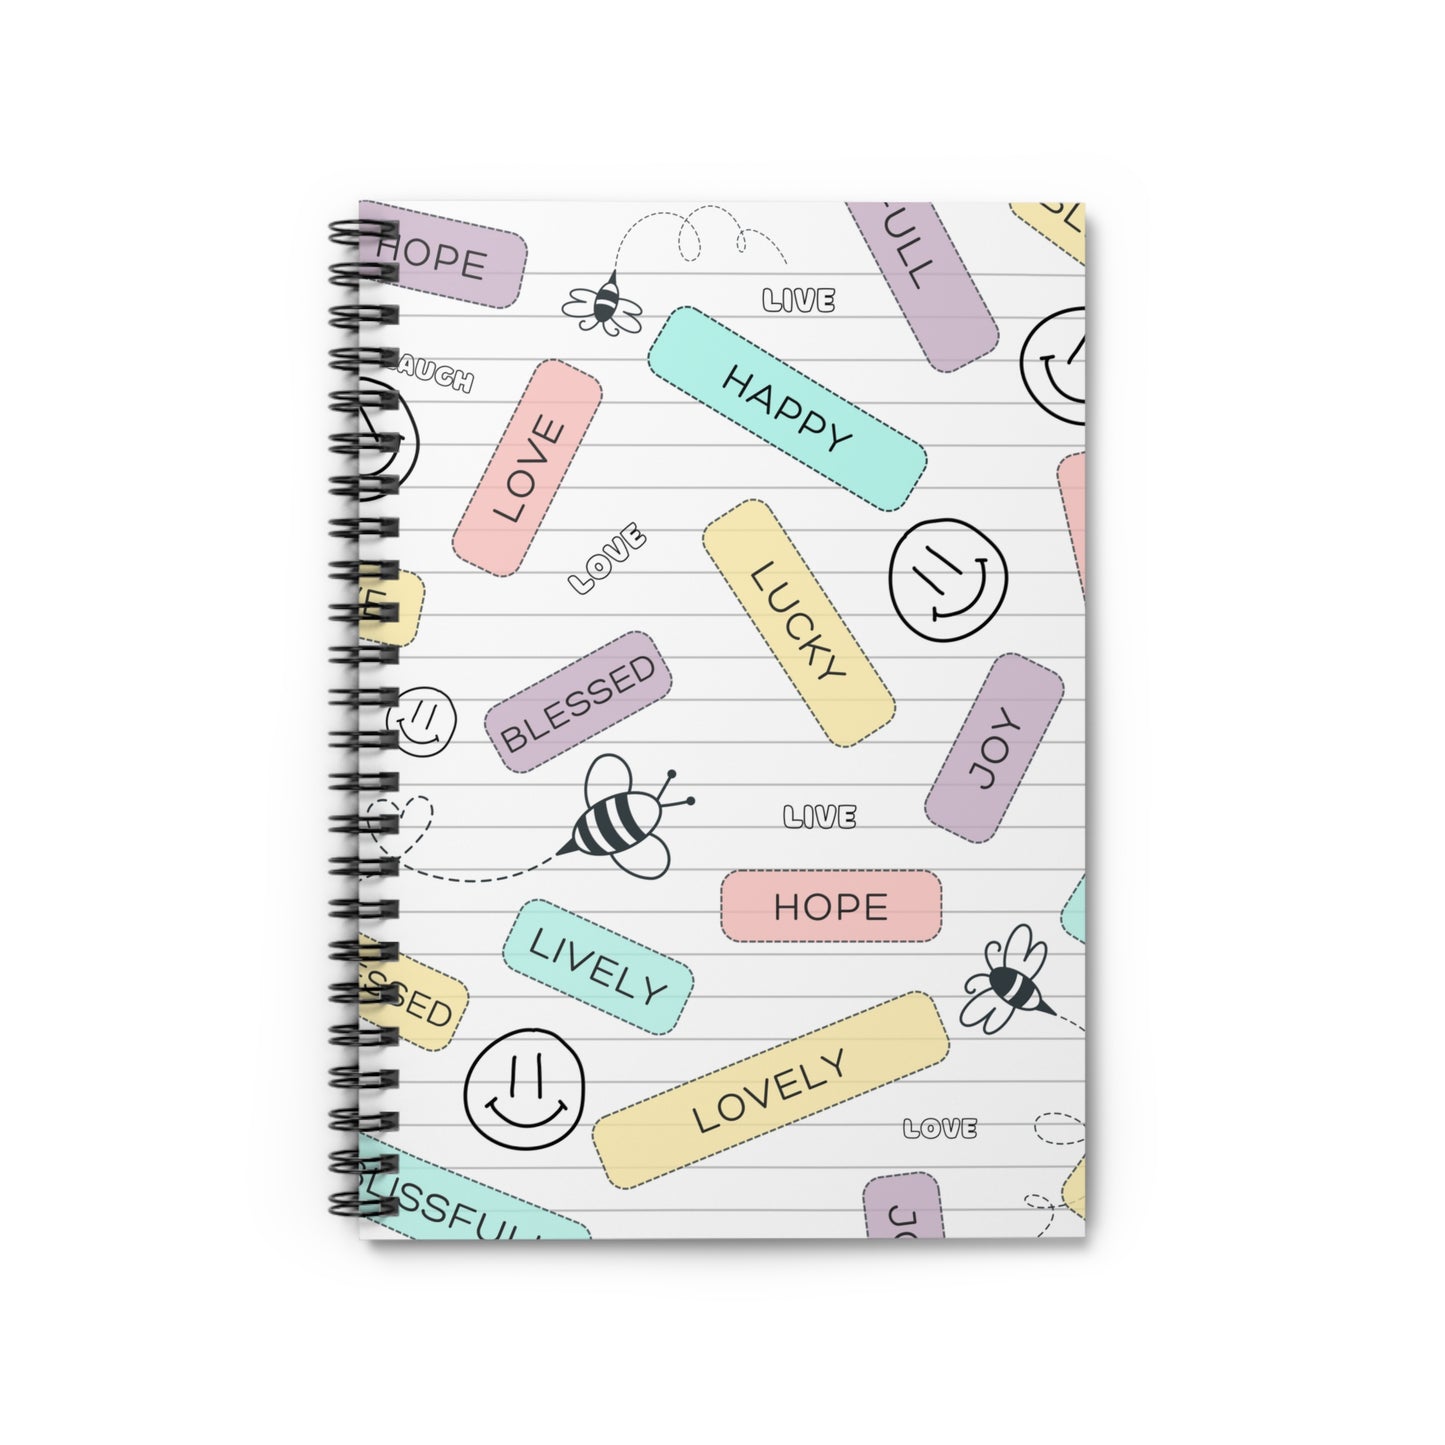 Pastel Colors Happy Spiral Notebook - Ruled Line